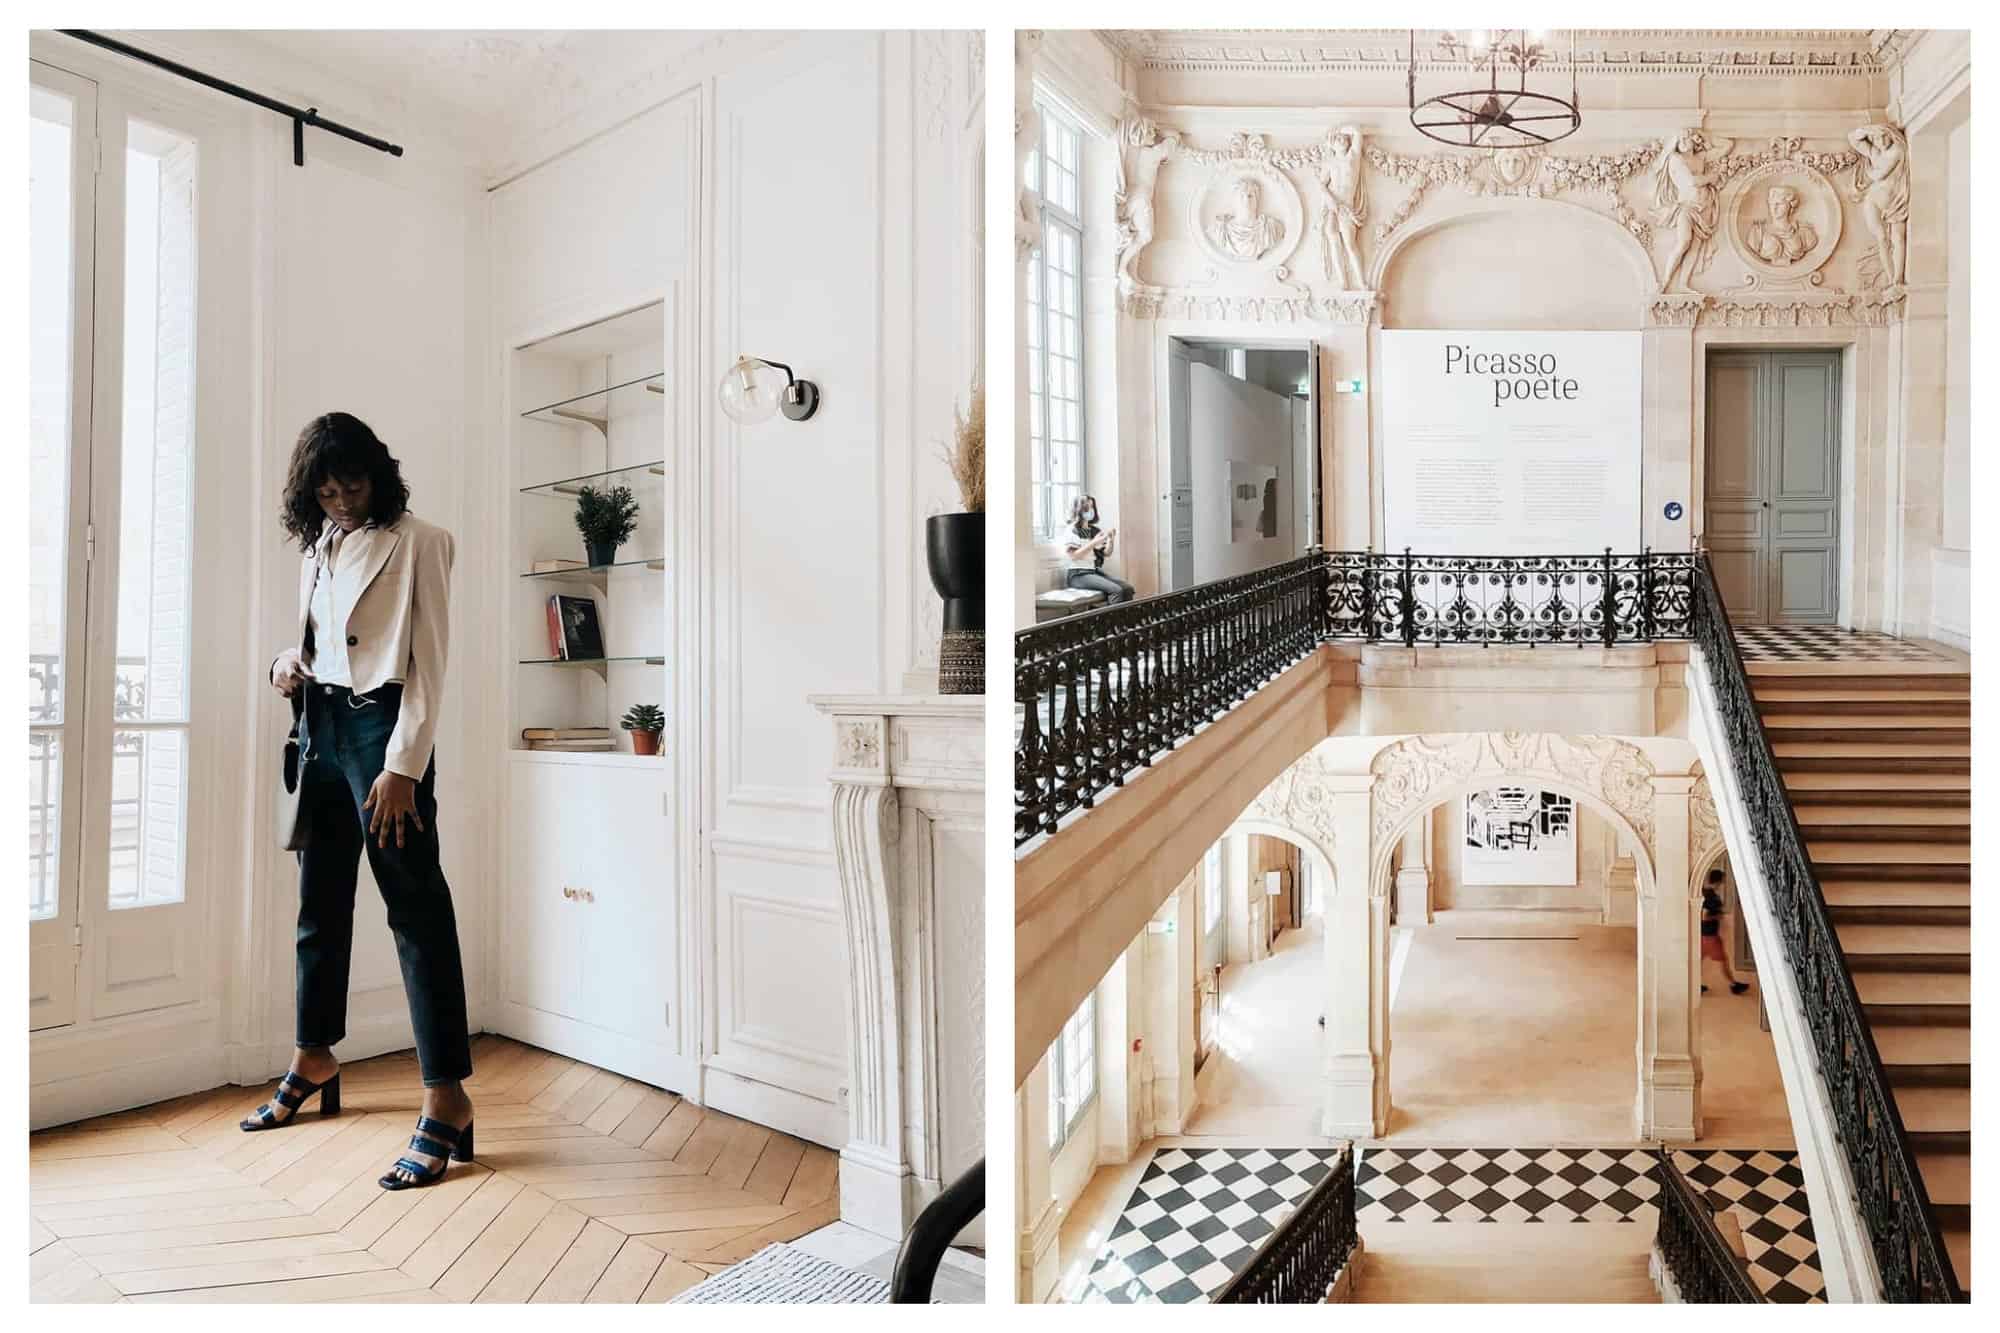 Left: A model for Le Marais fashion brand Ferdinand Duval is posing inside a beautiful Parisian living room. She is wearing a beige blazer that matches the color of the living room. Right: A photo of the interiors of the Musée Picasso which is located in Le Marais. It showcases its gorgeous Haussmanian architecture and staircase.